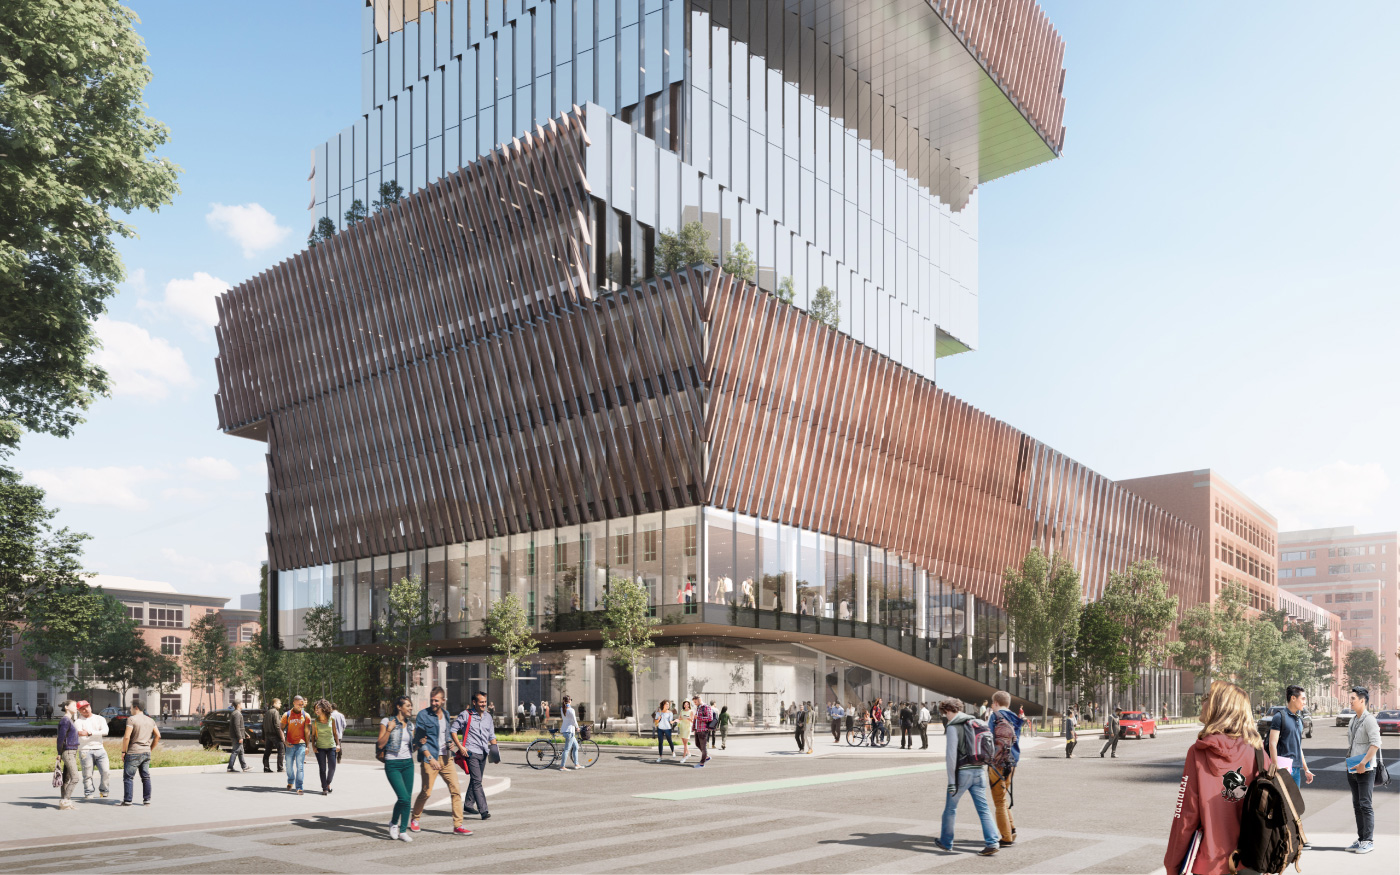 Rendering of a glassy tower with slanted louvers rising on the campus of Boston University